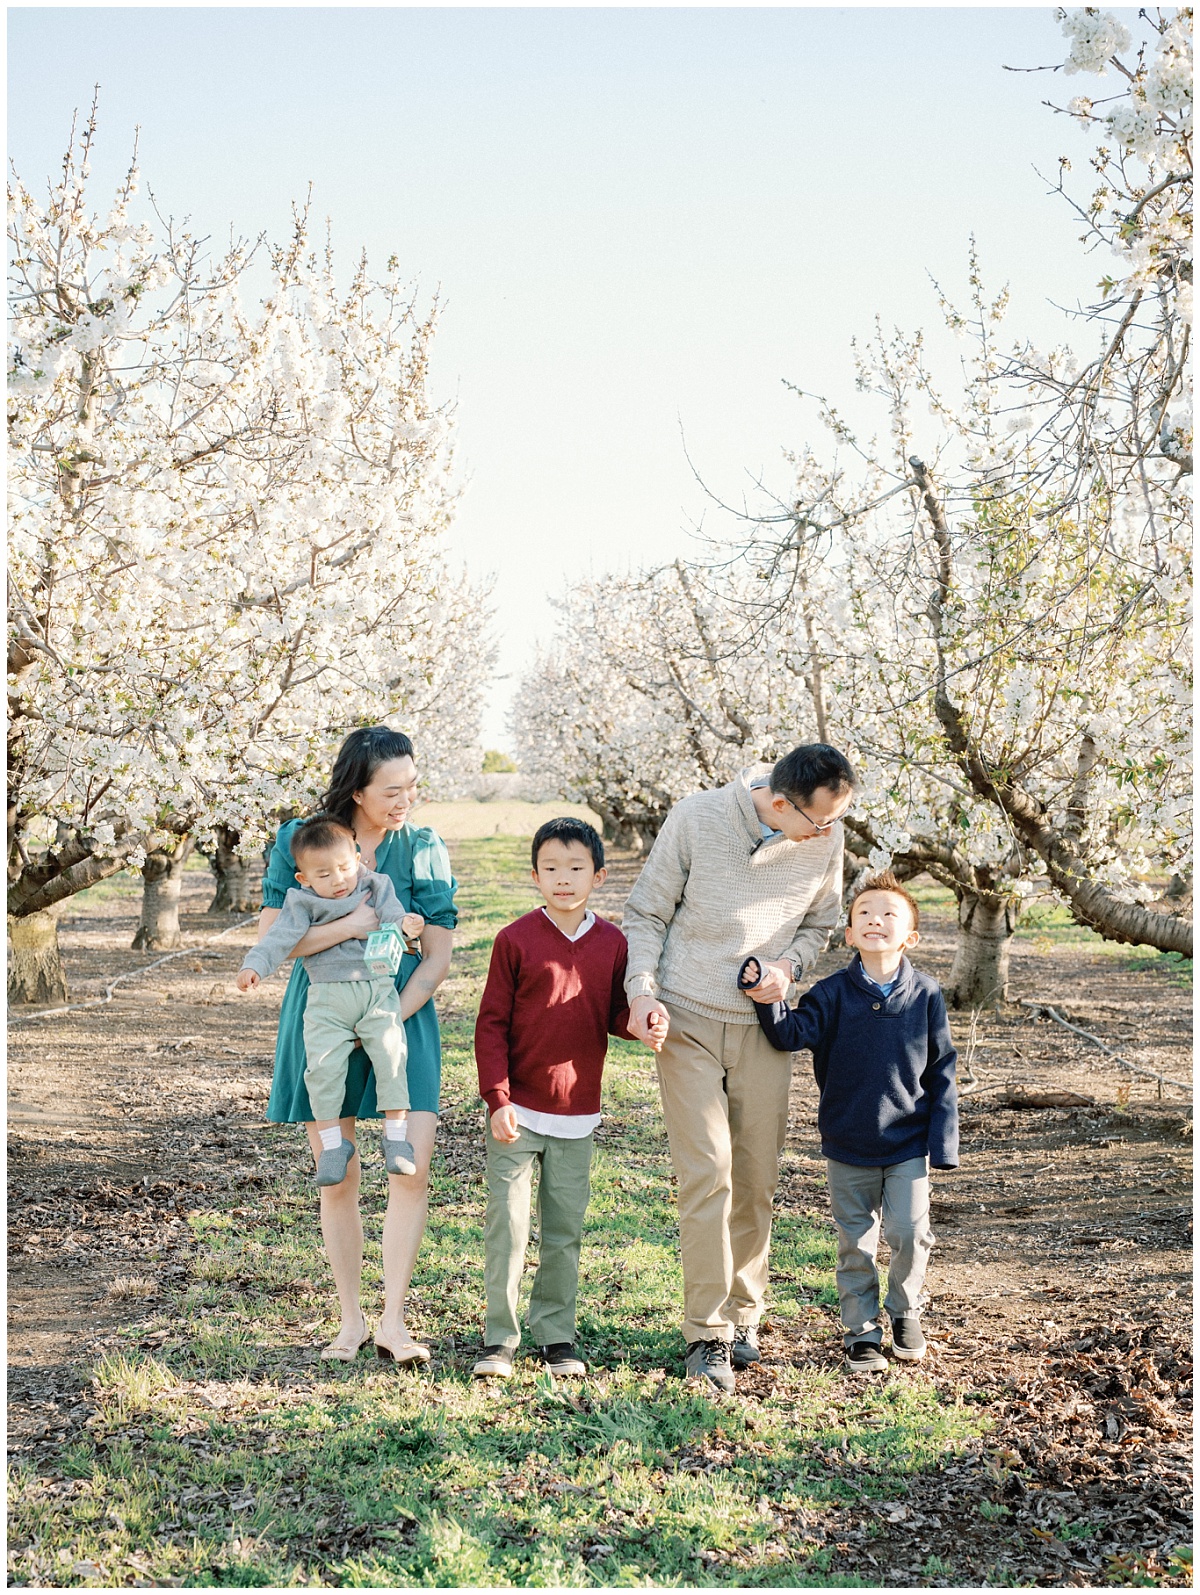 Family Photos at the Almond Blossom Orchard